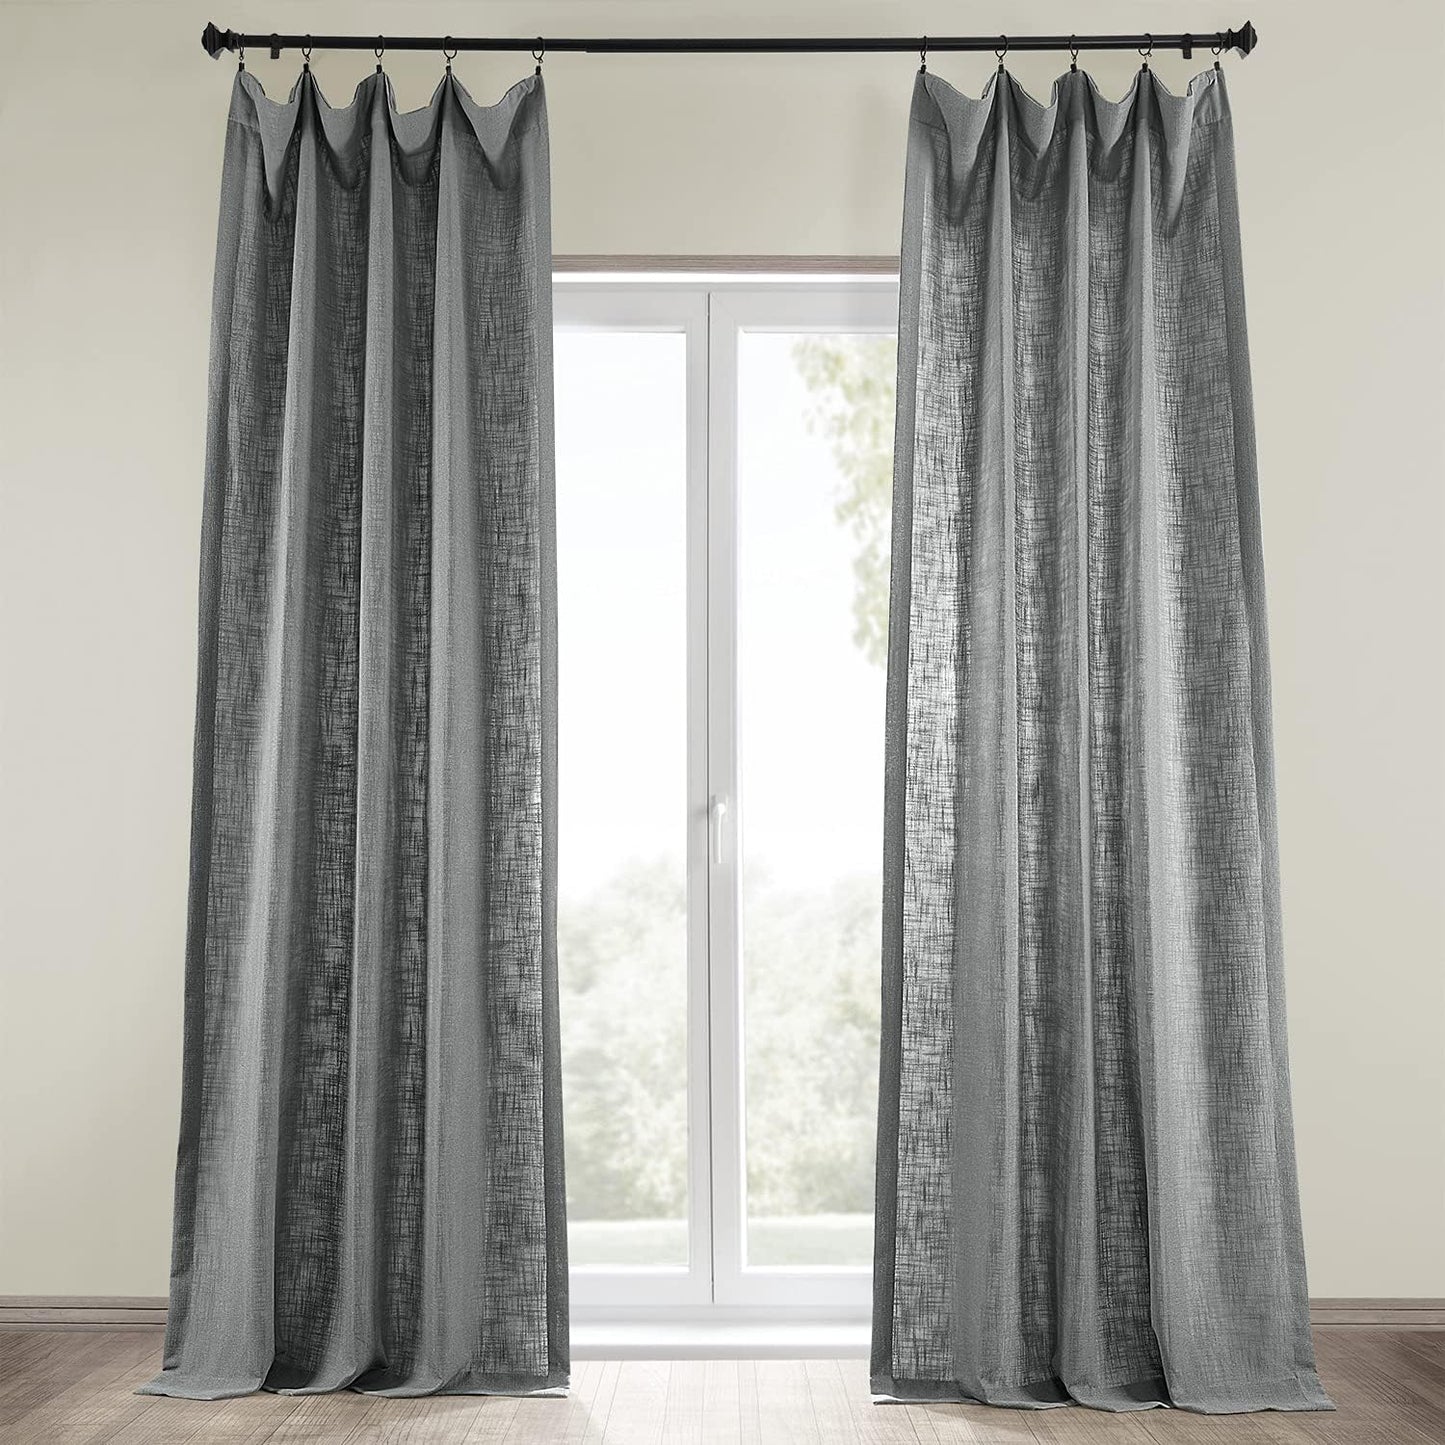 HPD Half Price Drapes Semi Sheer Faux Linen Curtains for Bedroom 96 Inches Long Light Filtering Living Room Window Curtain (1 Panel), 50W X 96L, Rice White  EFF Pewter Grey 50W X 108L 